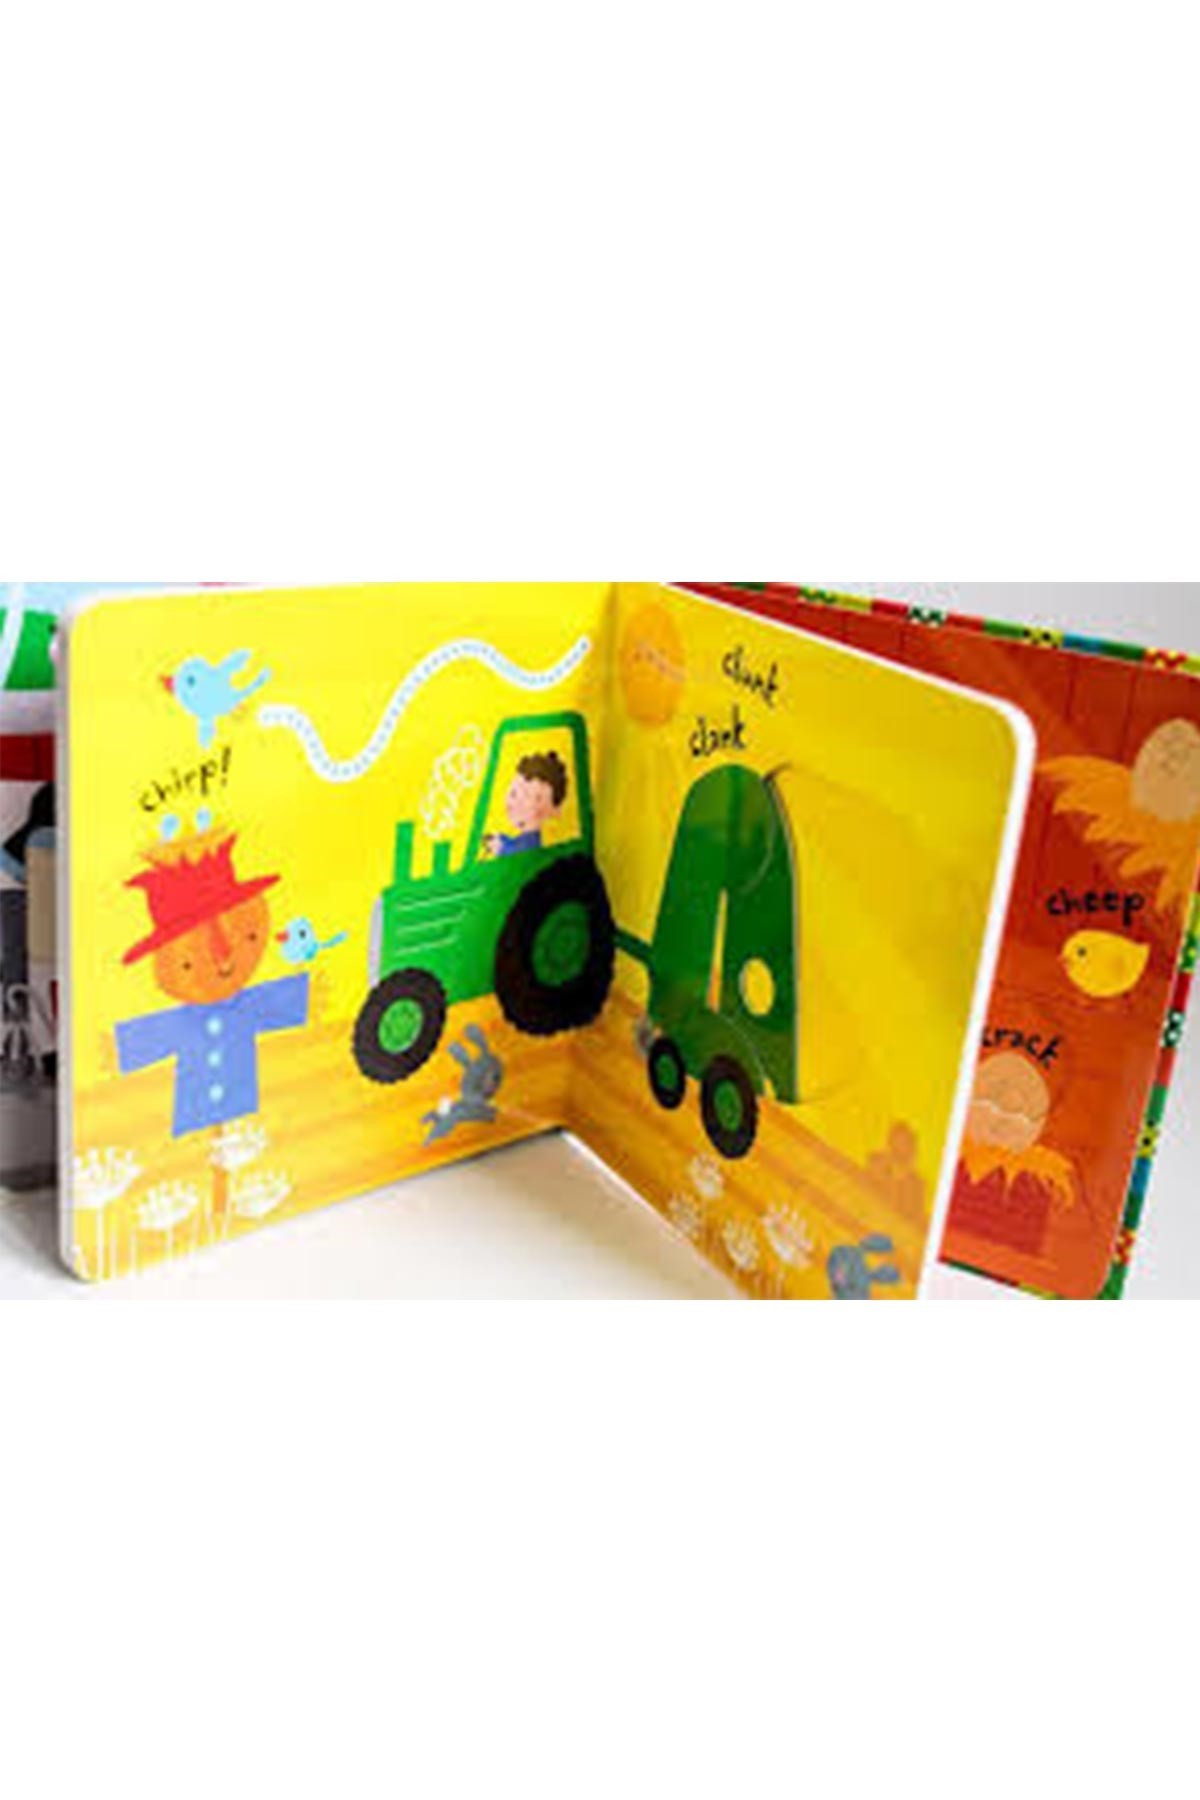 The Usborne BVF Slide and See Farm